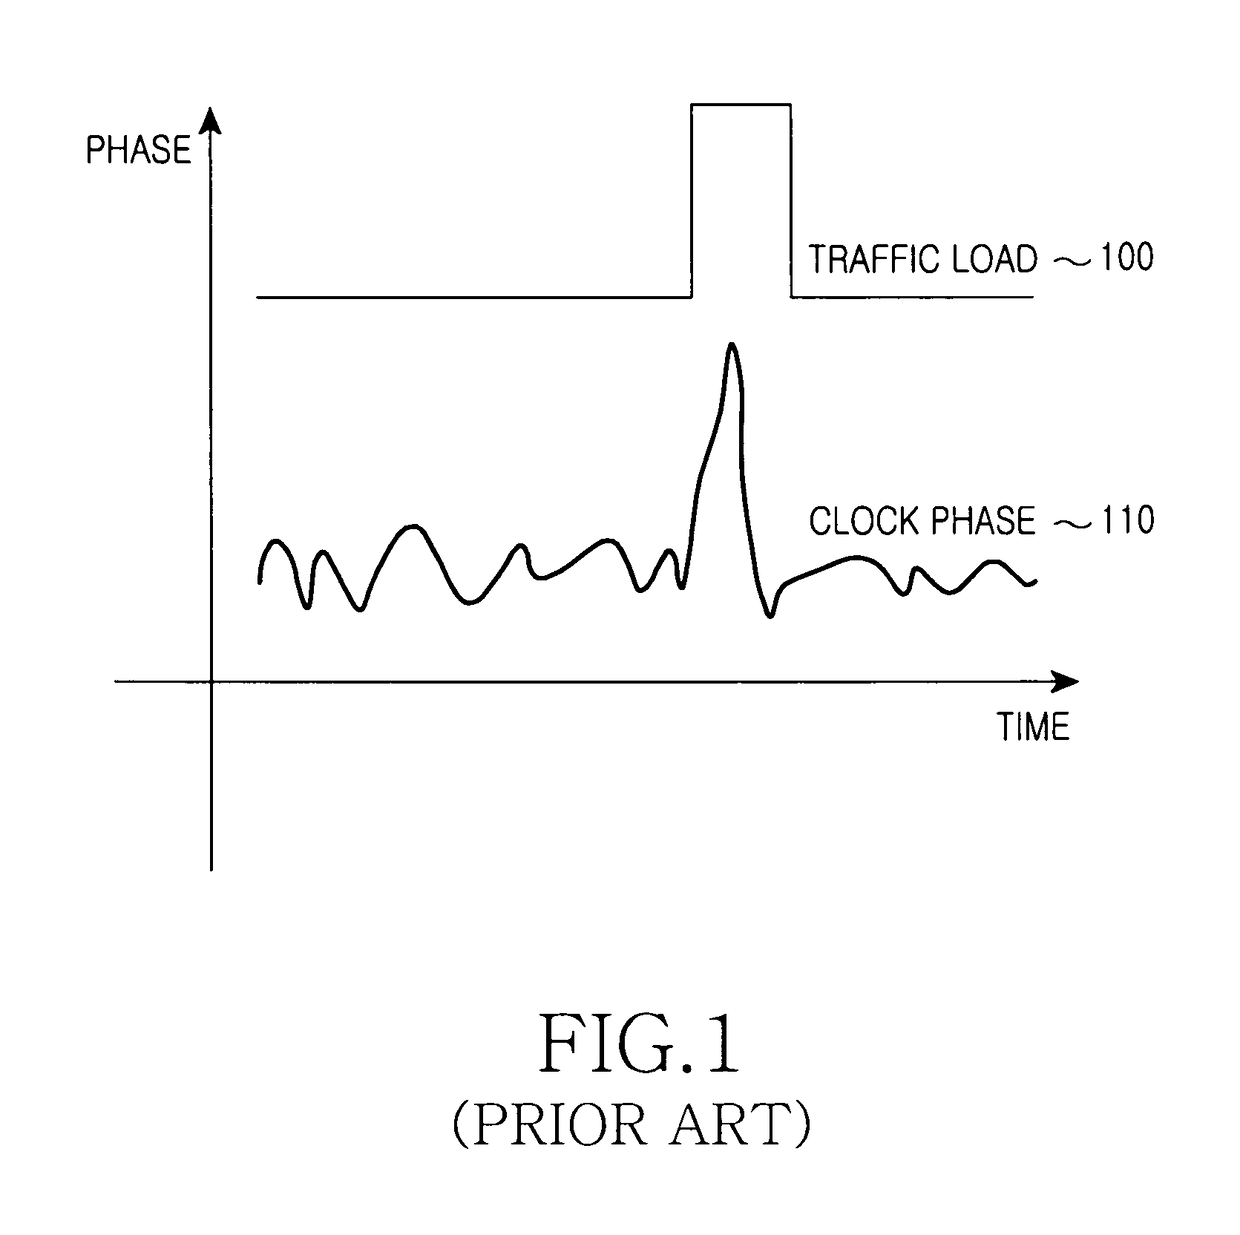 Apparatus and method for timing synchronization in a communication system